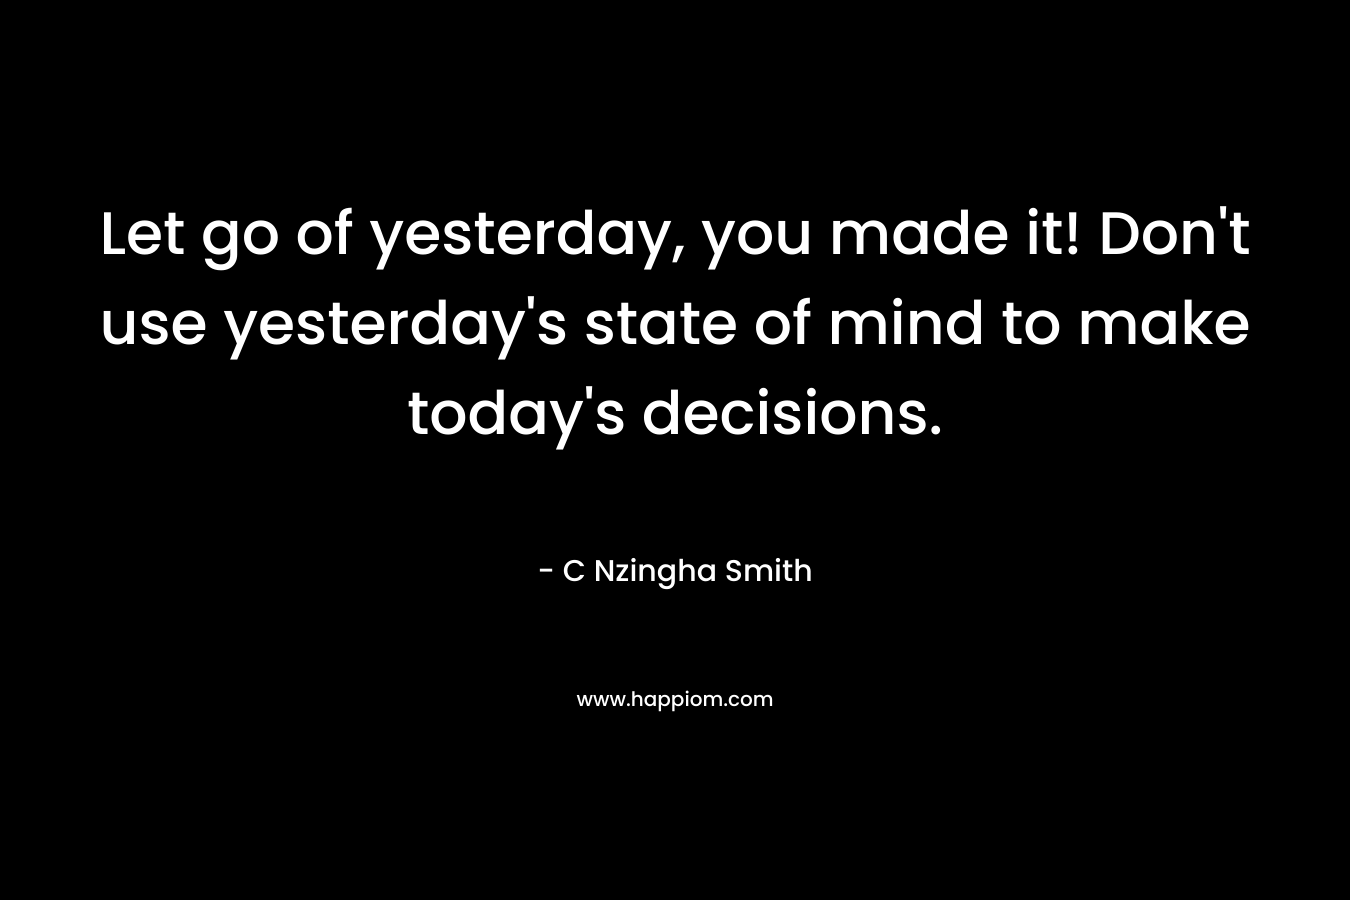 Let go of yesterday, you made it! Don't use yesterday's state of mind to make today's decisions.